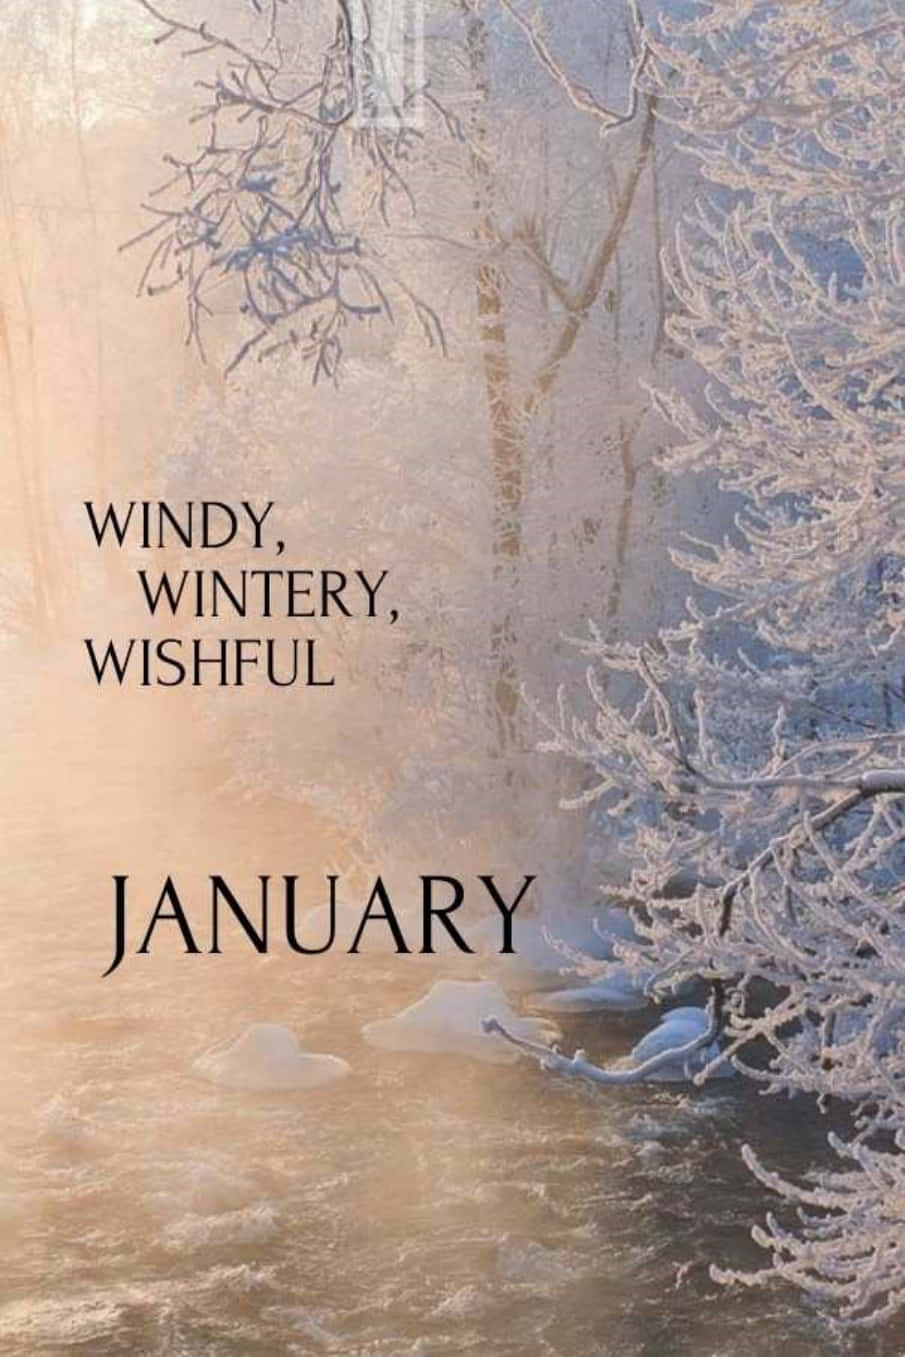 "Welcome January, full of possibilities and opportunities!" Wallpaper